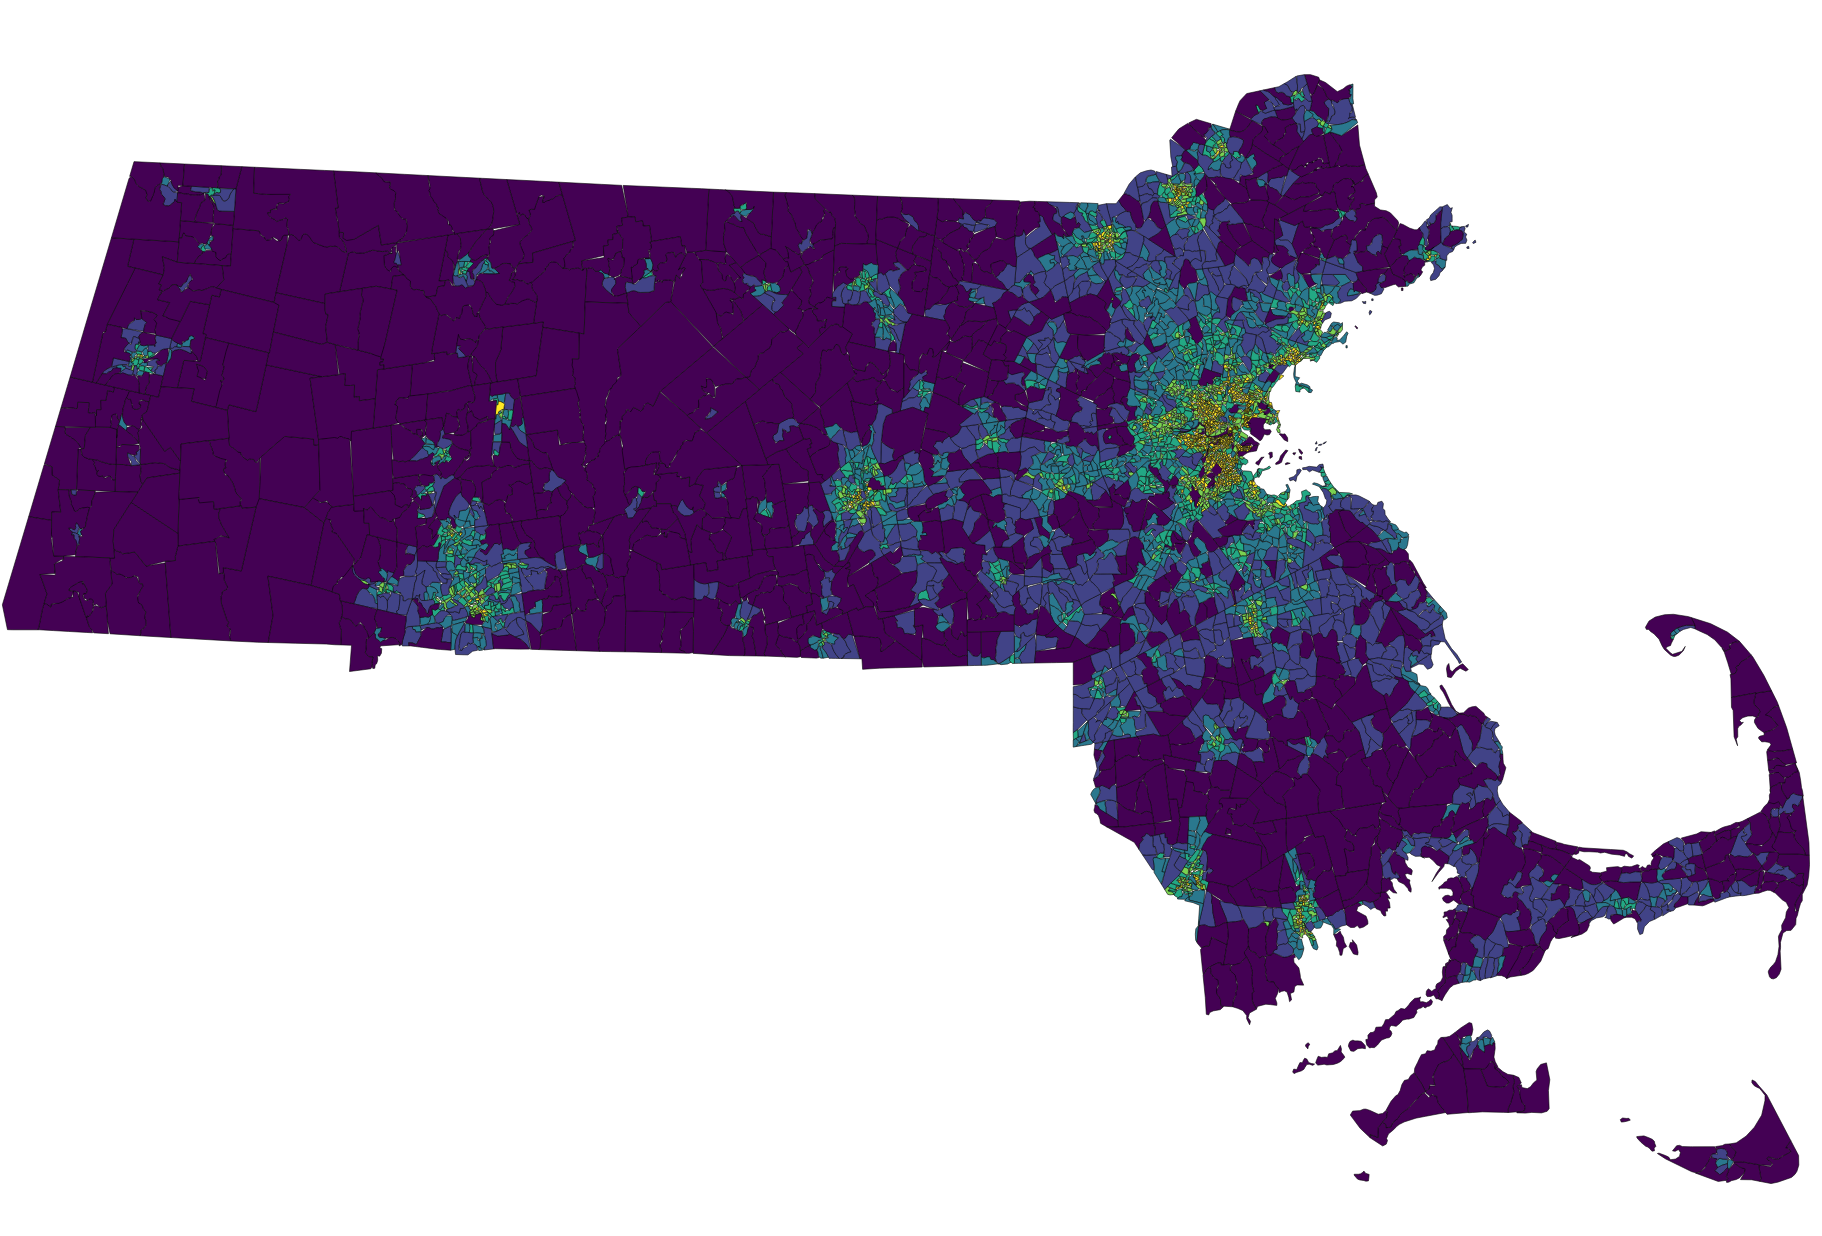 Block groups in MA from the 2020 US Census, using the Viridis color scheme to highlight areas with higher population density